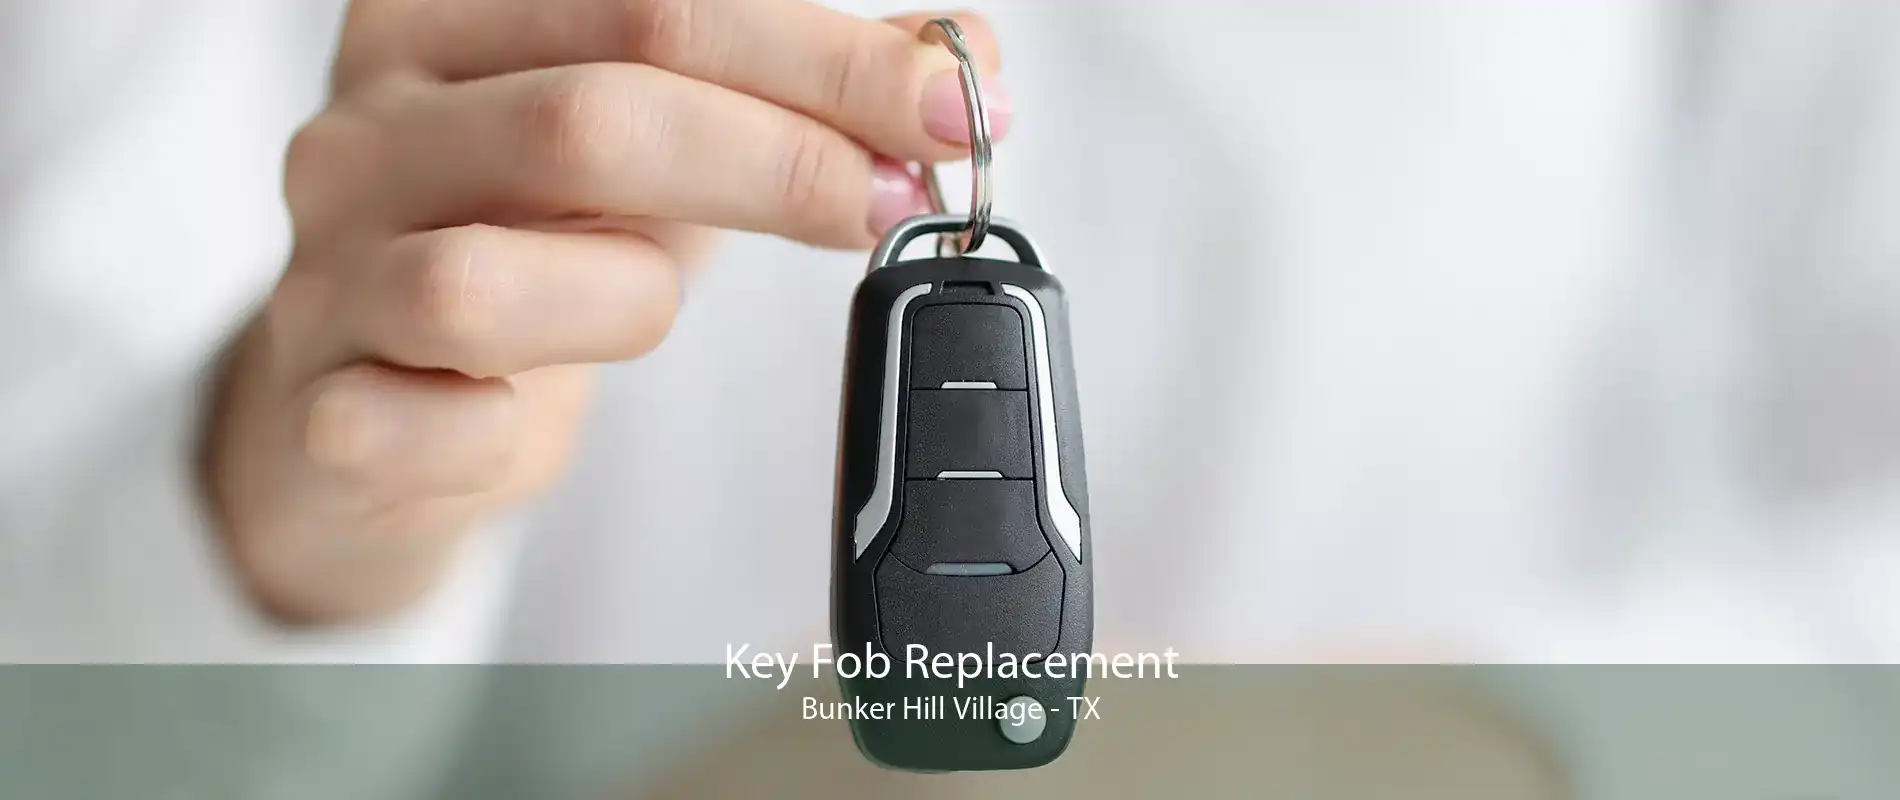 Key Fob Replacement Bunker Hill Village - TX